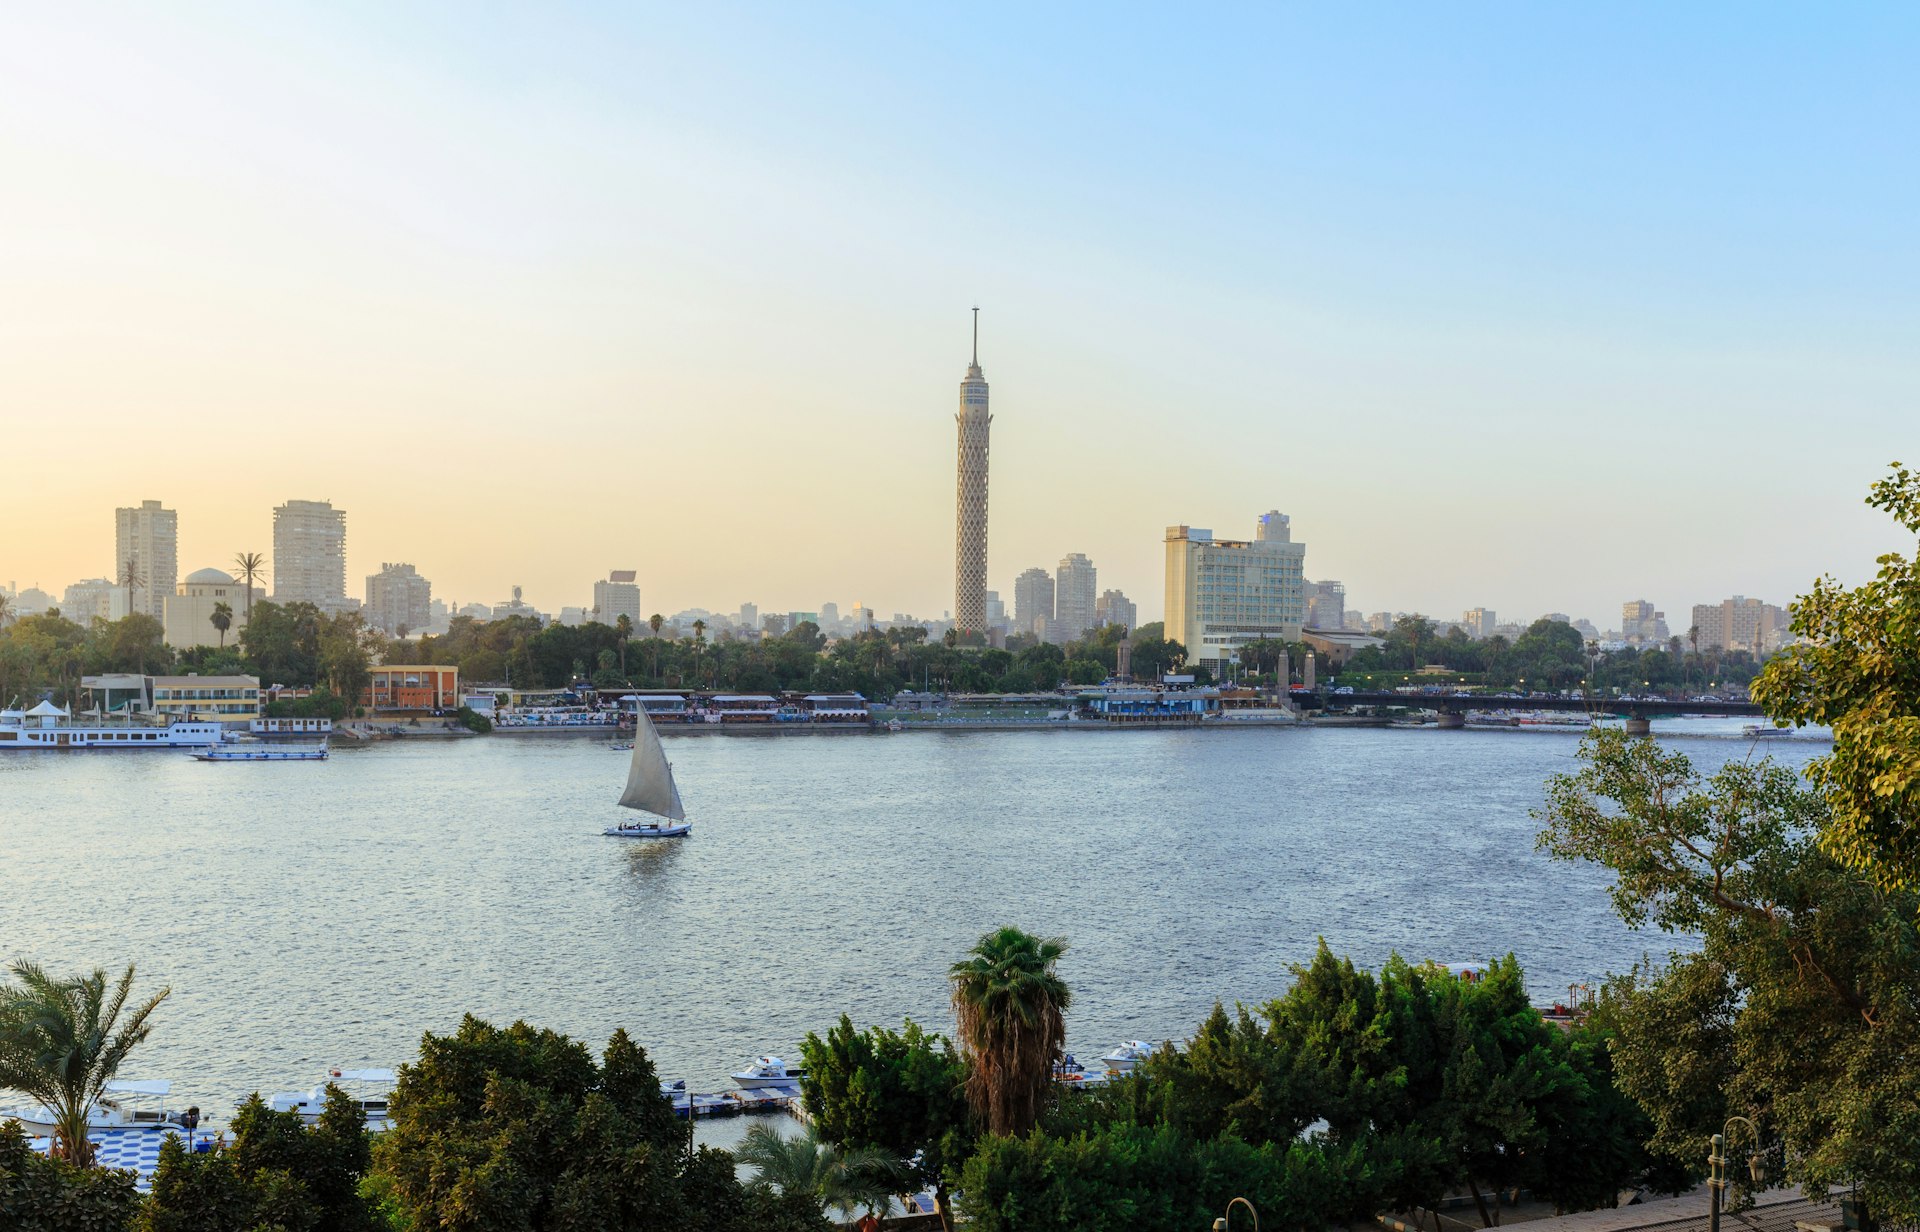 The Nile River weaving through the city of Cairo, with a few small sail boats